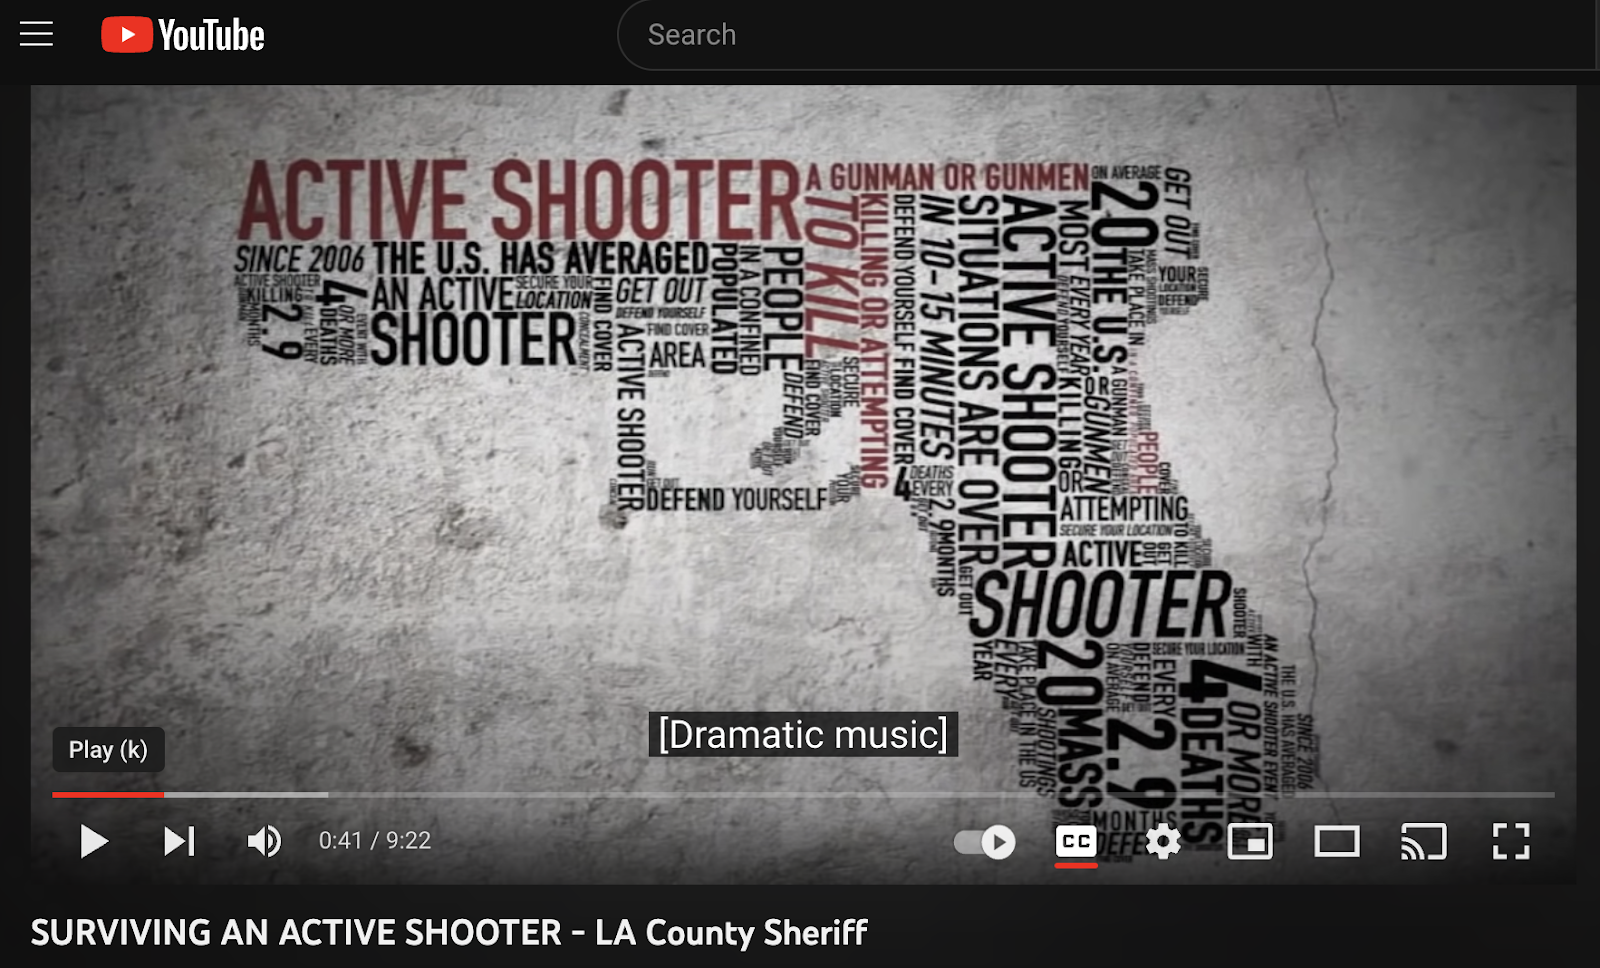 A video produced by the Los Angeles County Sheriff's Department details the 'Run, Hide, Fight' response in different active shooter scenarios. WARNING: Video is graphic and depicts gun violence.